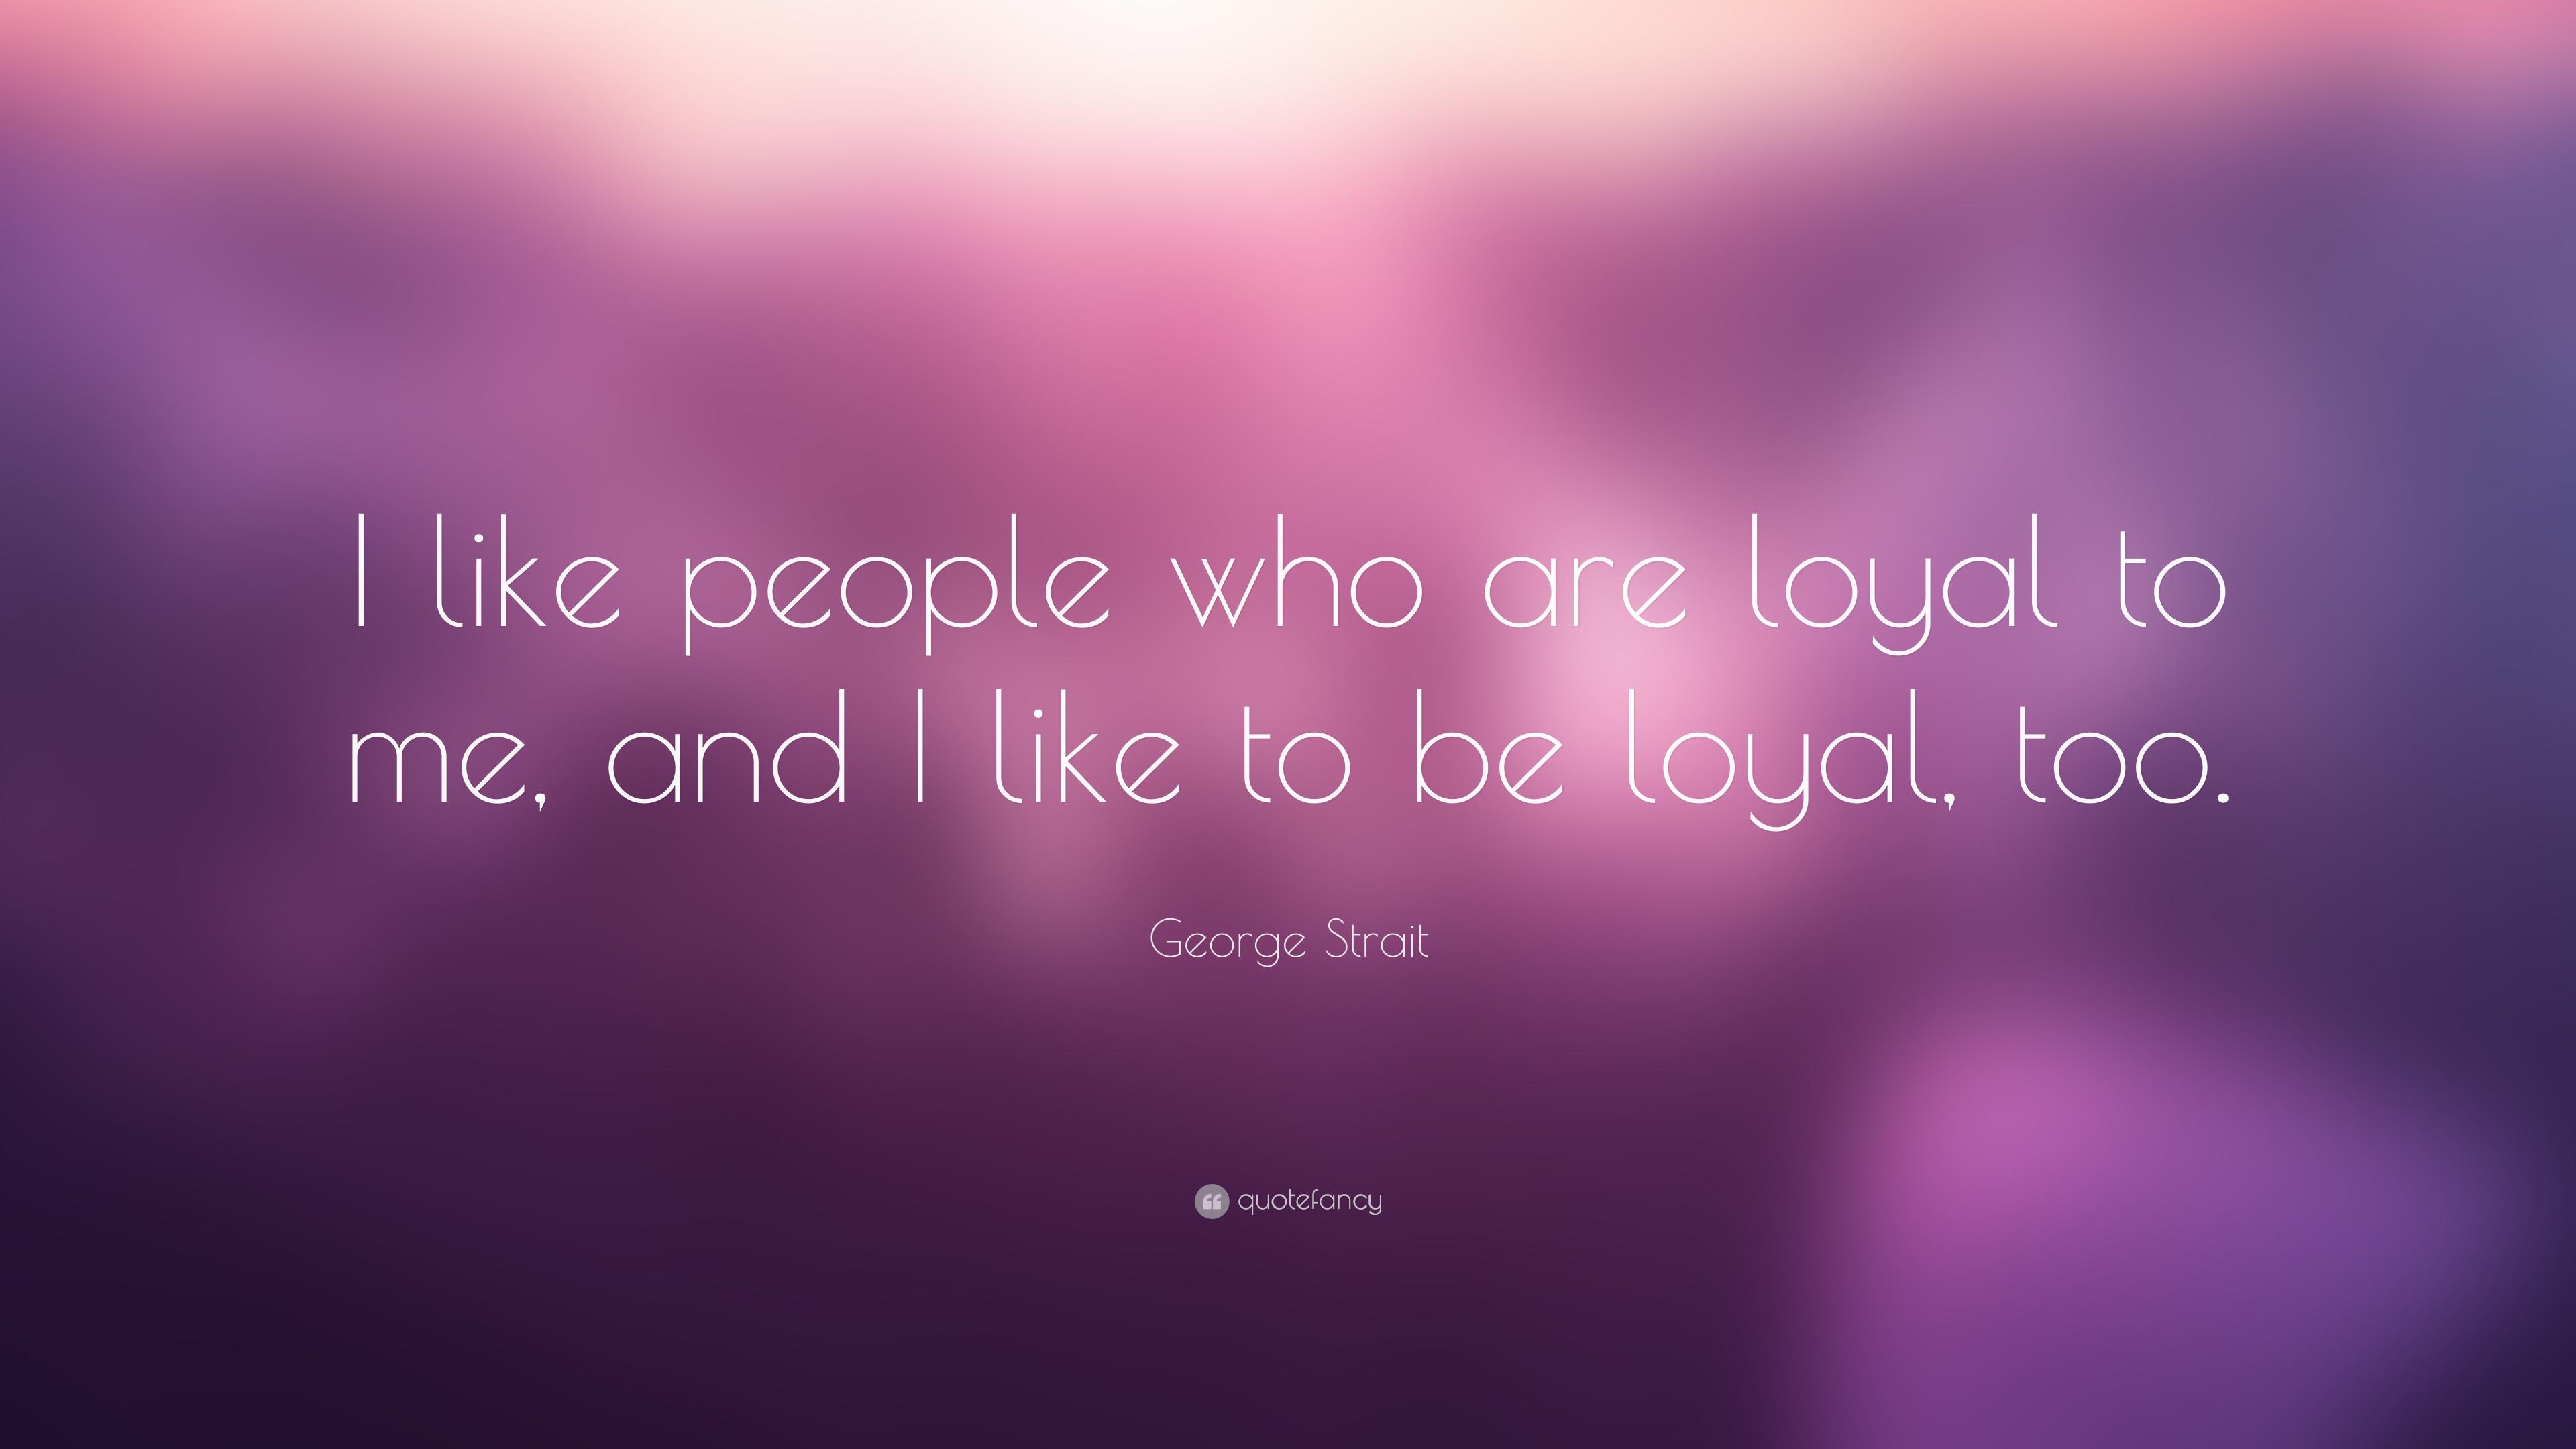 George Strait Quote: “I like people who are loyal to me, and I like